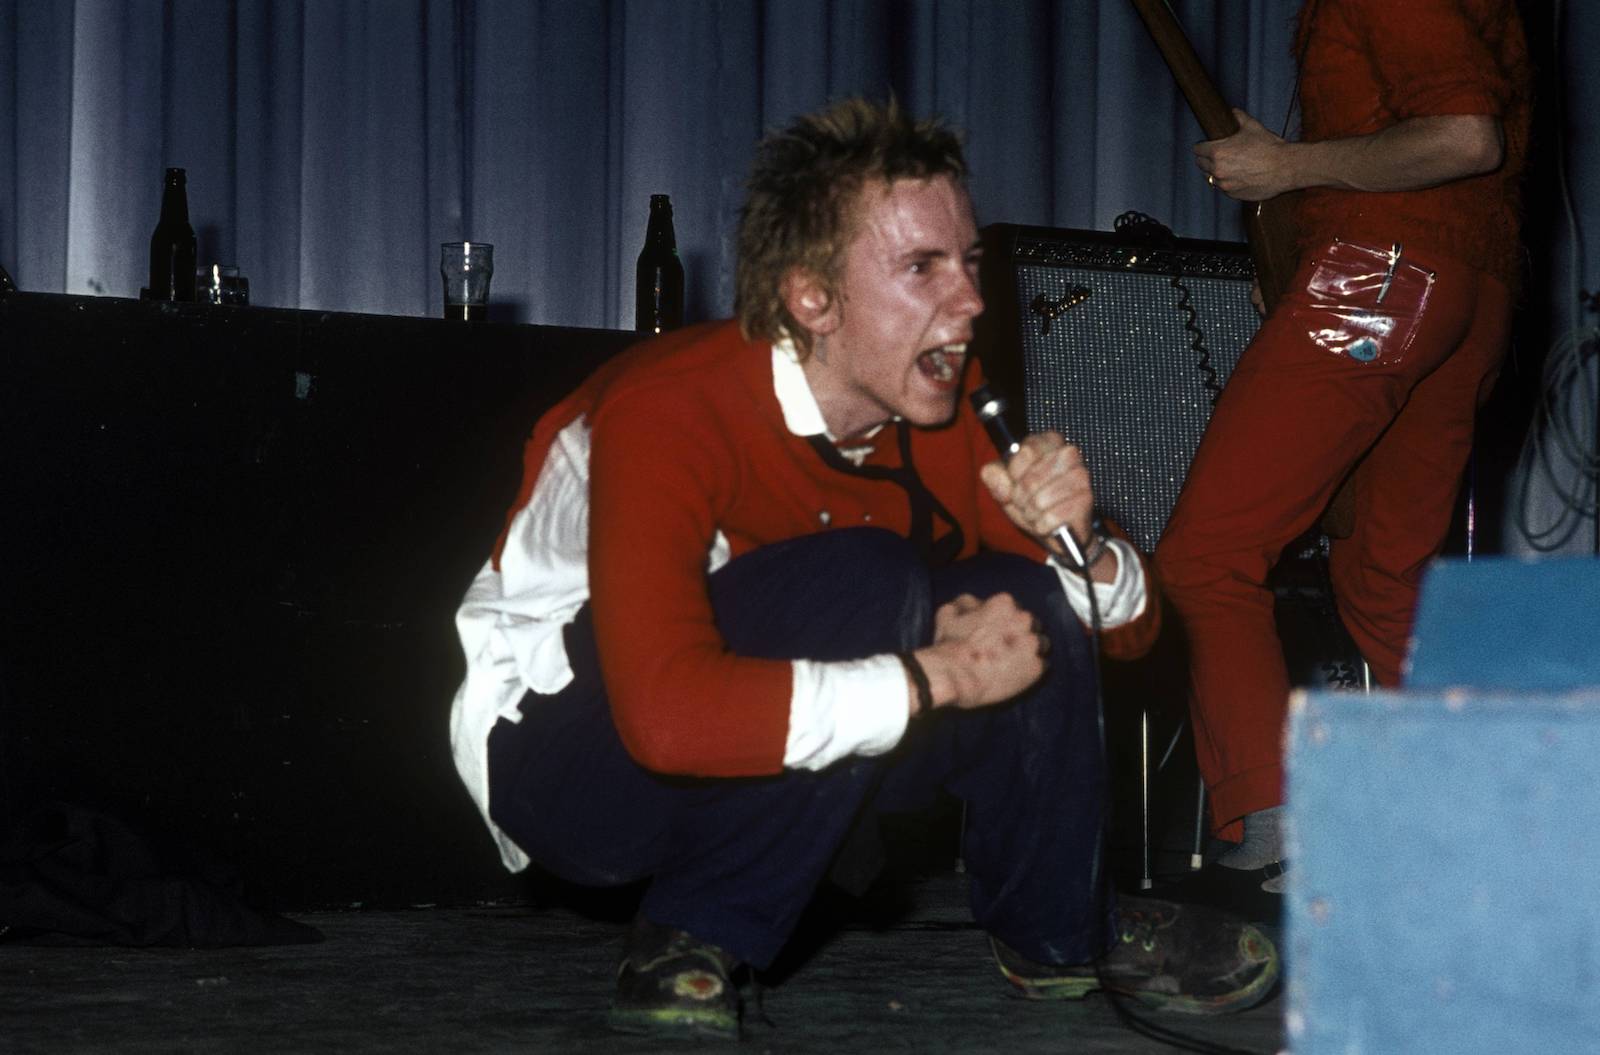 Sex Pistols frontman John Lydon crouches during a performance, which often included 'God Save the Queen'